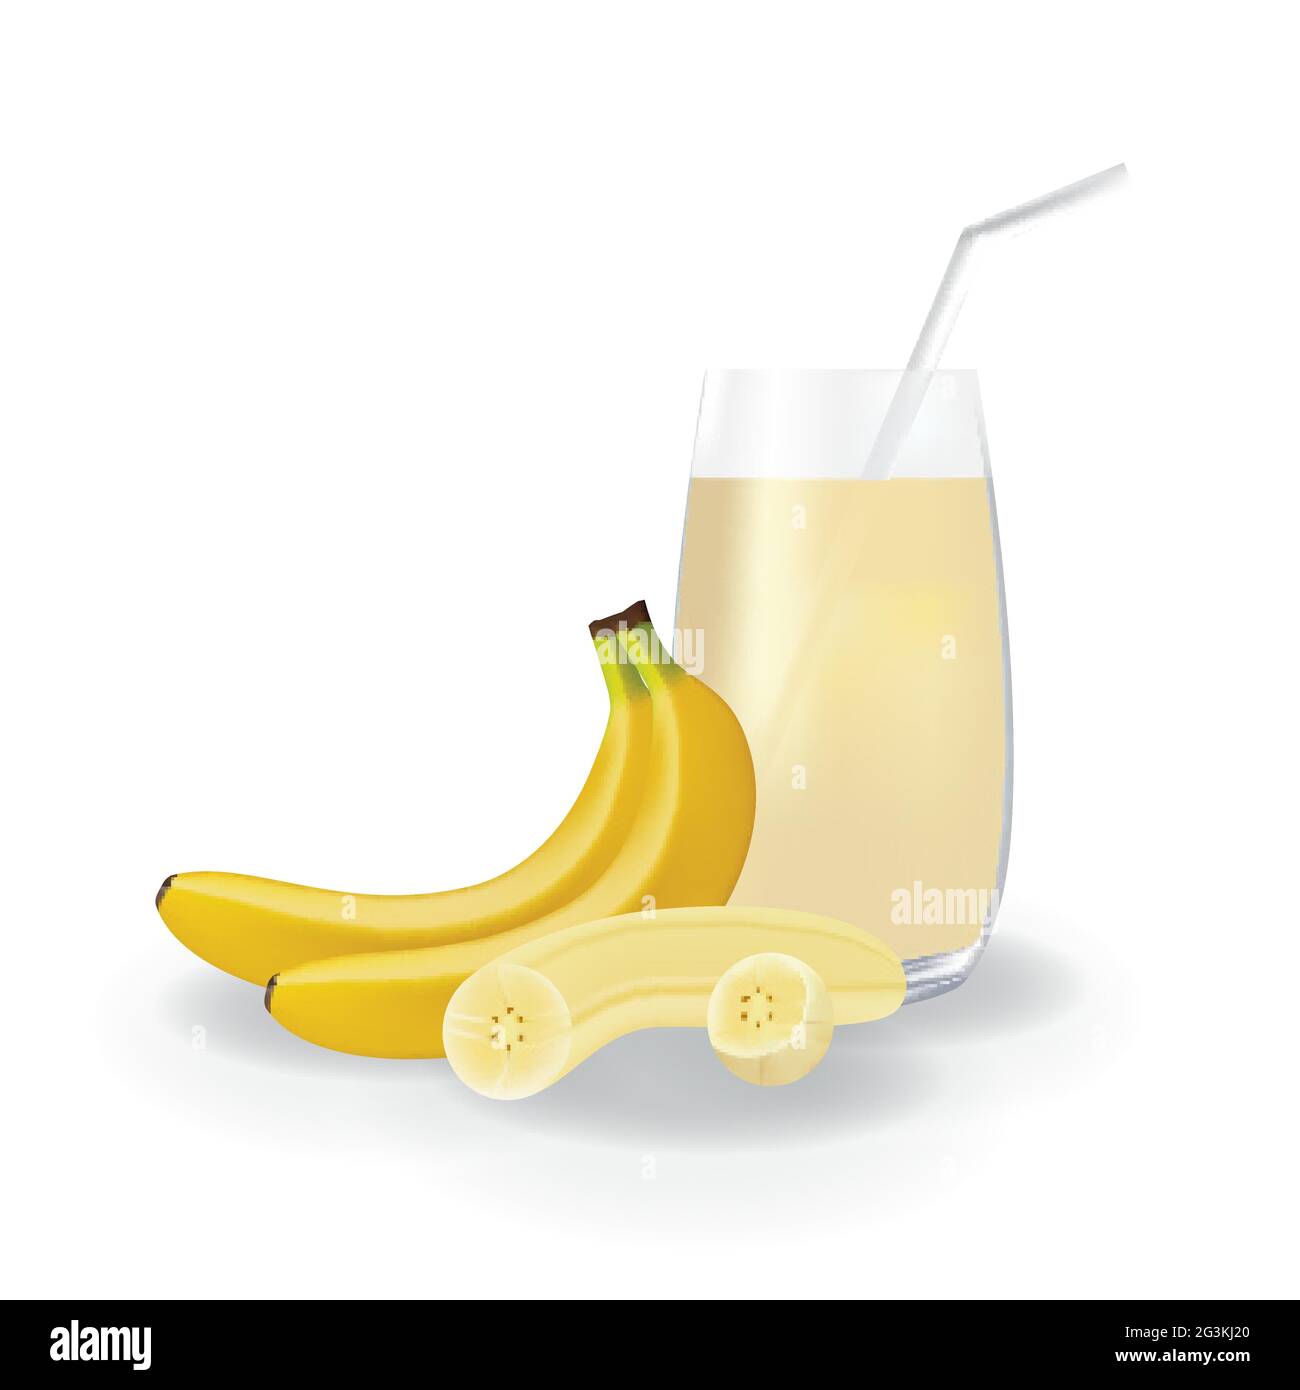 Realistic Banana Fruit Juice in Glass Straw Healthy Organic Drink Illustration Stock Vector